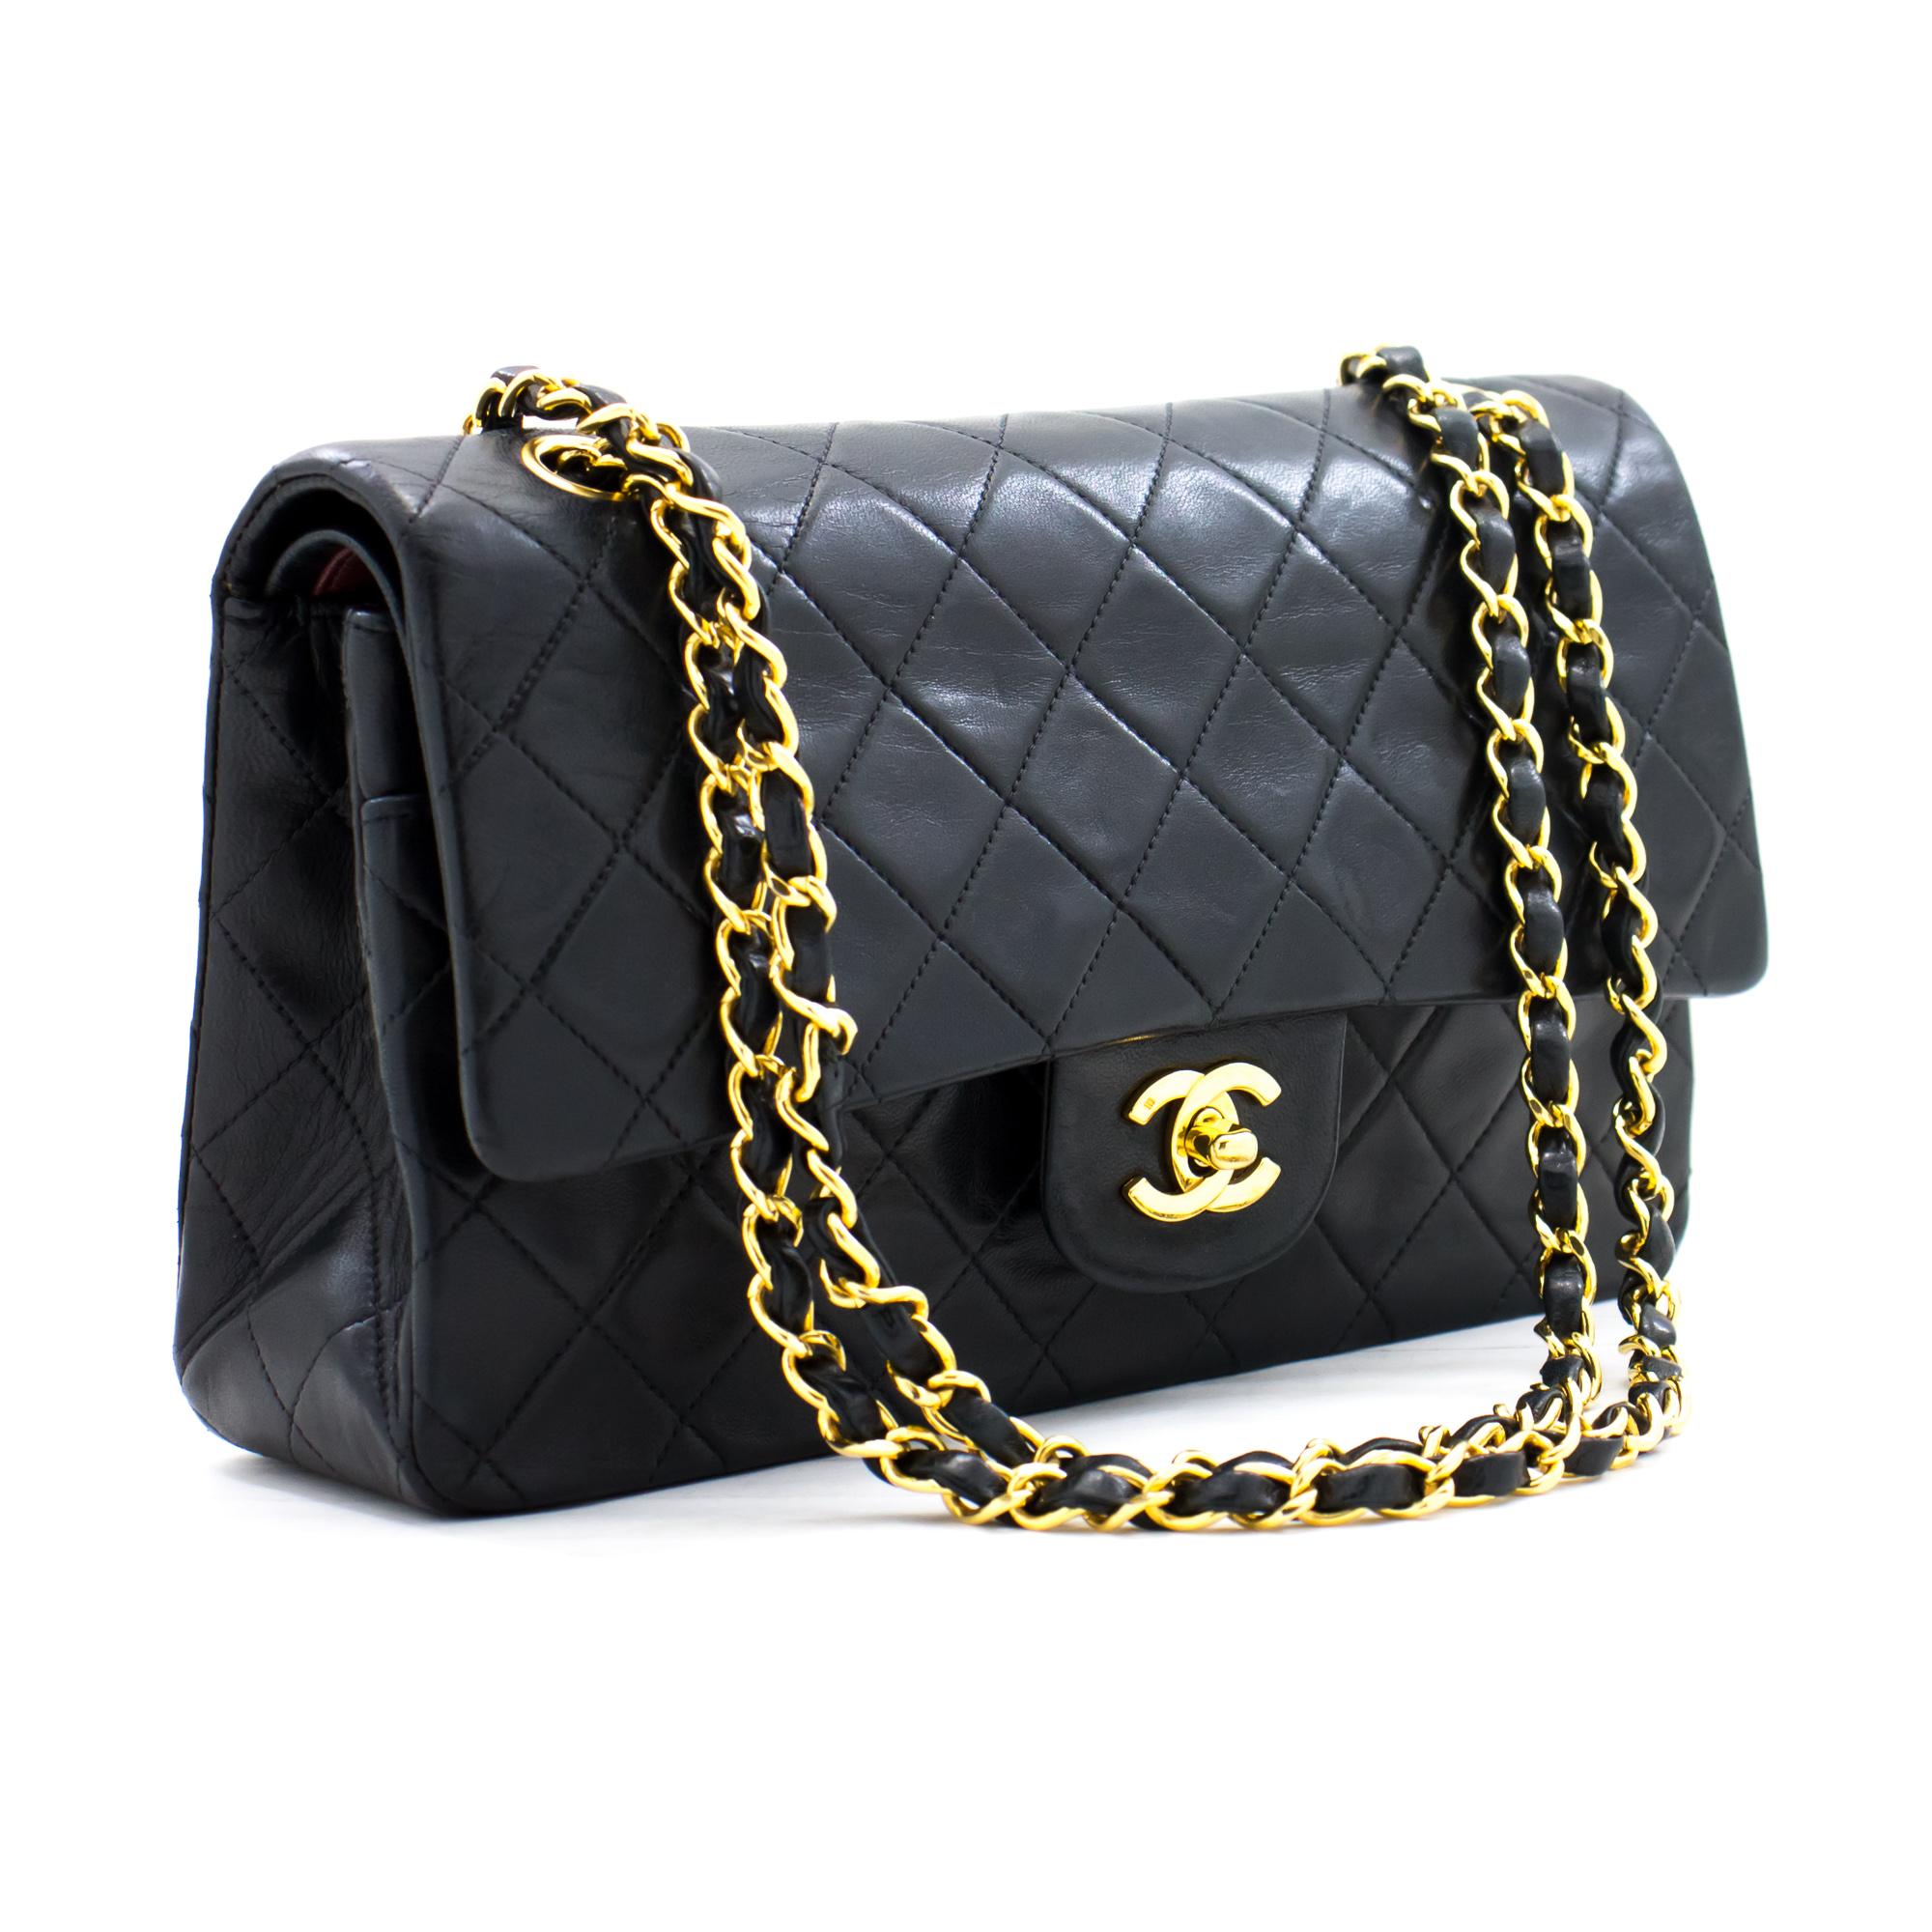 This iconic Chanel 10 inch bag is crafted from quilted black lambskin and features a double flap. On the front flap there is the classic CC logo twist lock, and on the second flap a stud closure with one slip-in pocket. The inside lining is covered